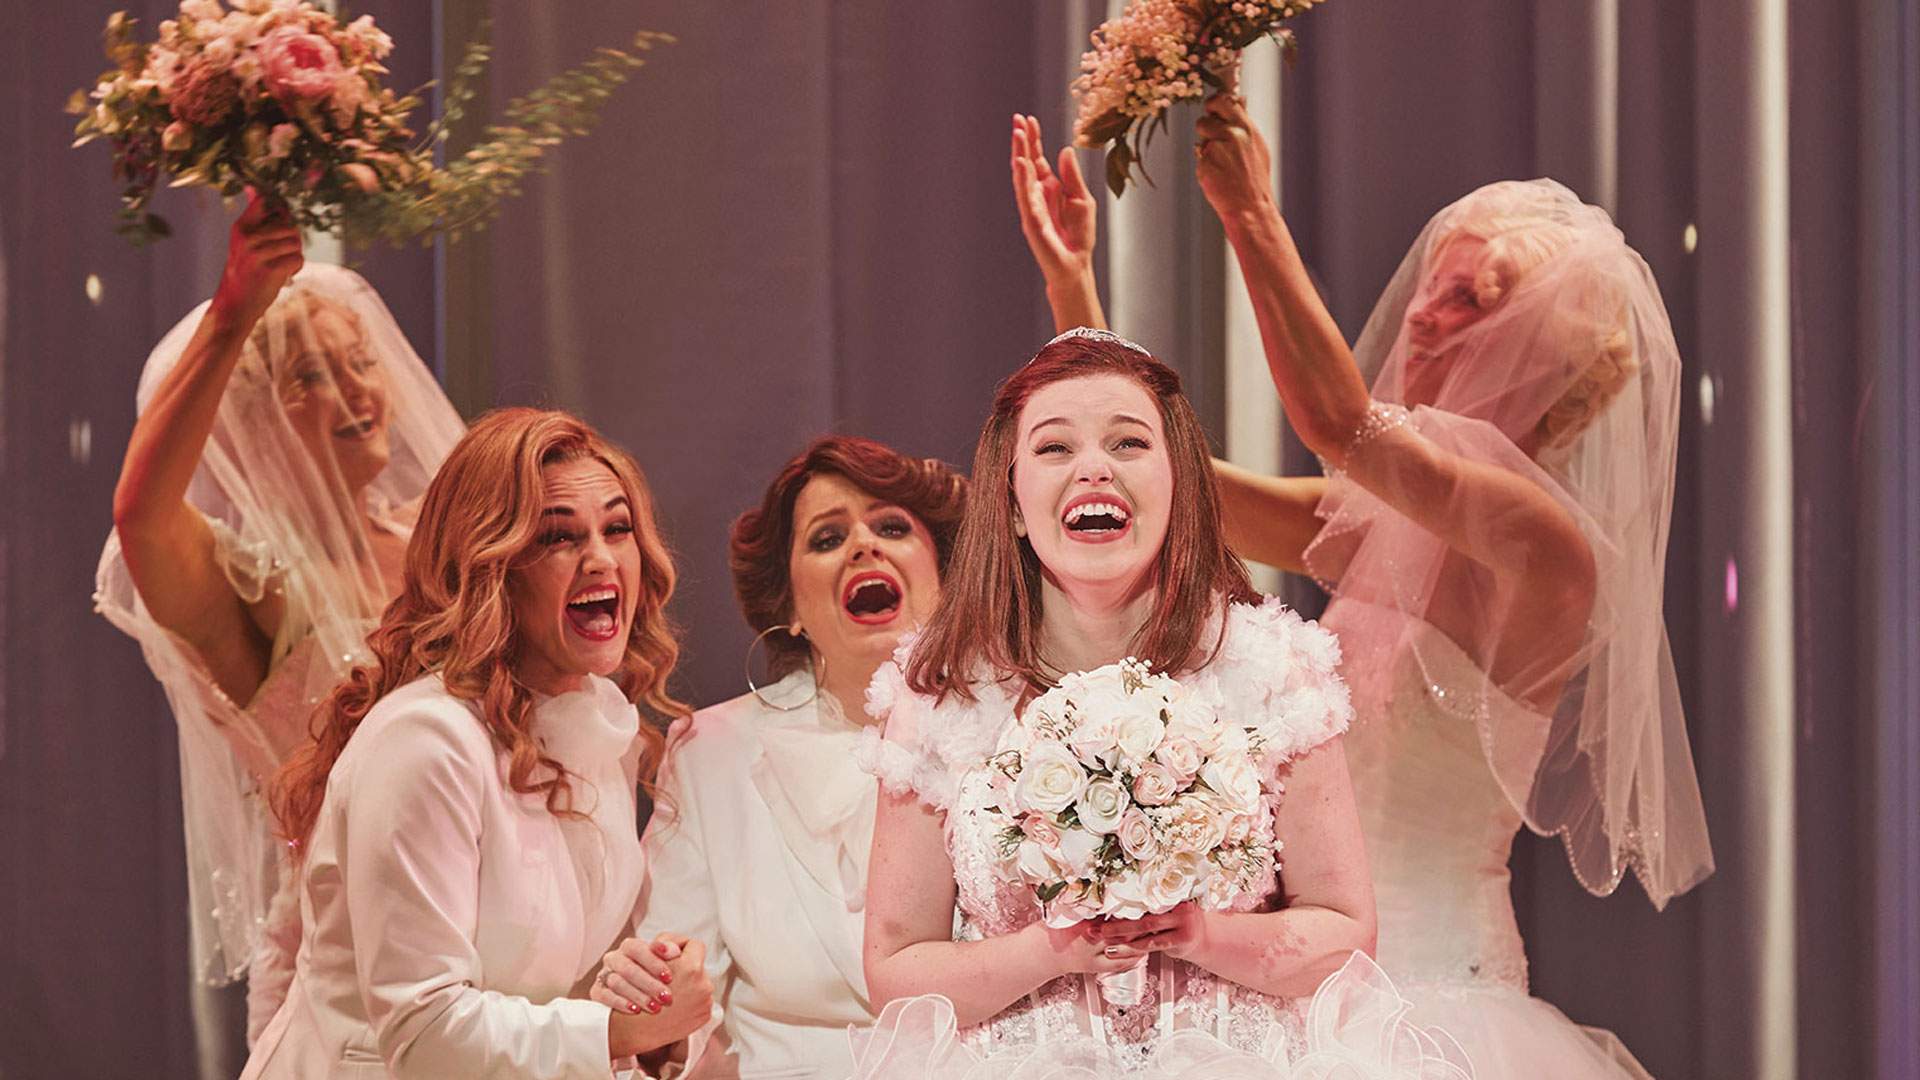 Sydney's Sell-Out Musical Version of 'Muriel's Wedding' Is Coming to Melbourne